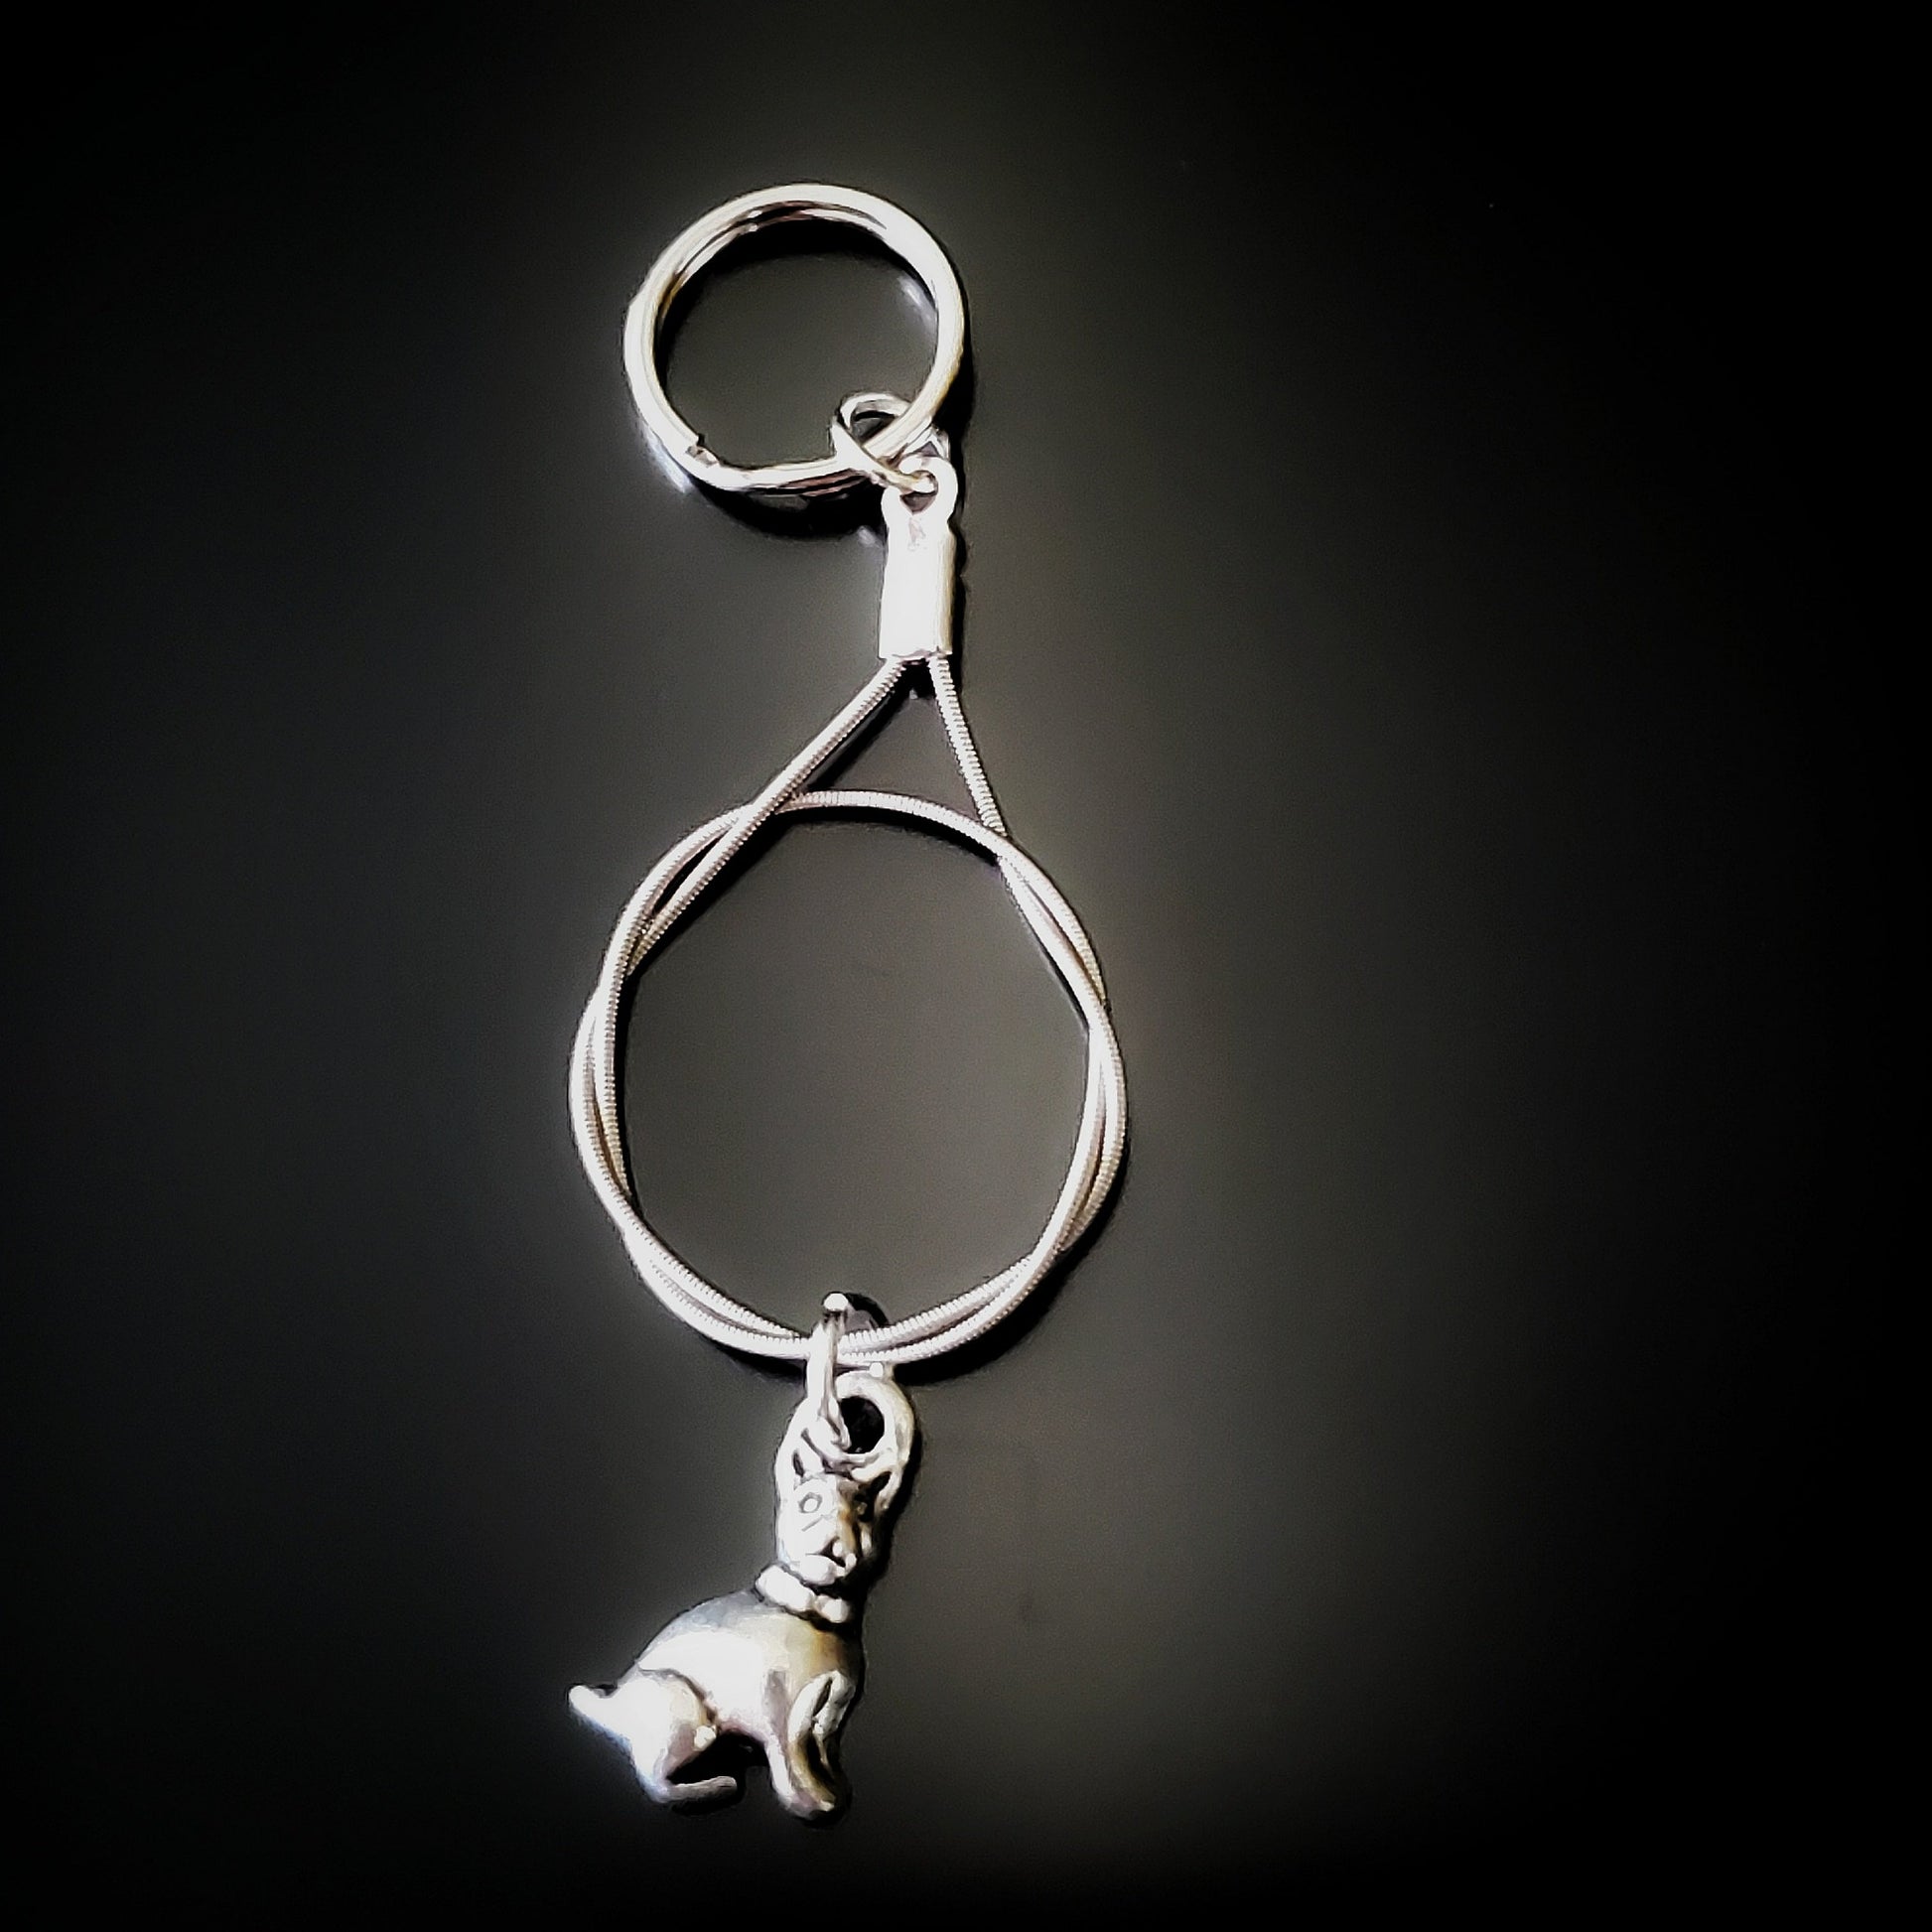 a silver coloured keychain made from an upcycled guitar string on which hangs a silver dog pendant - black background with grey shadow